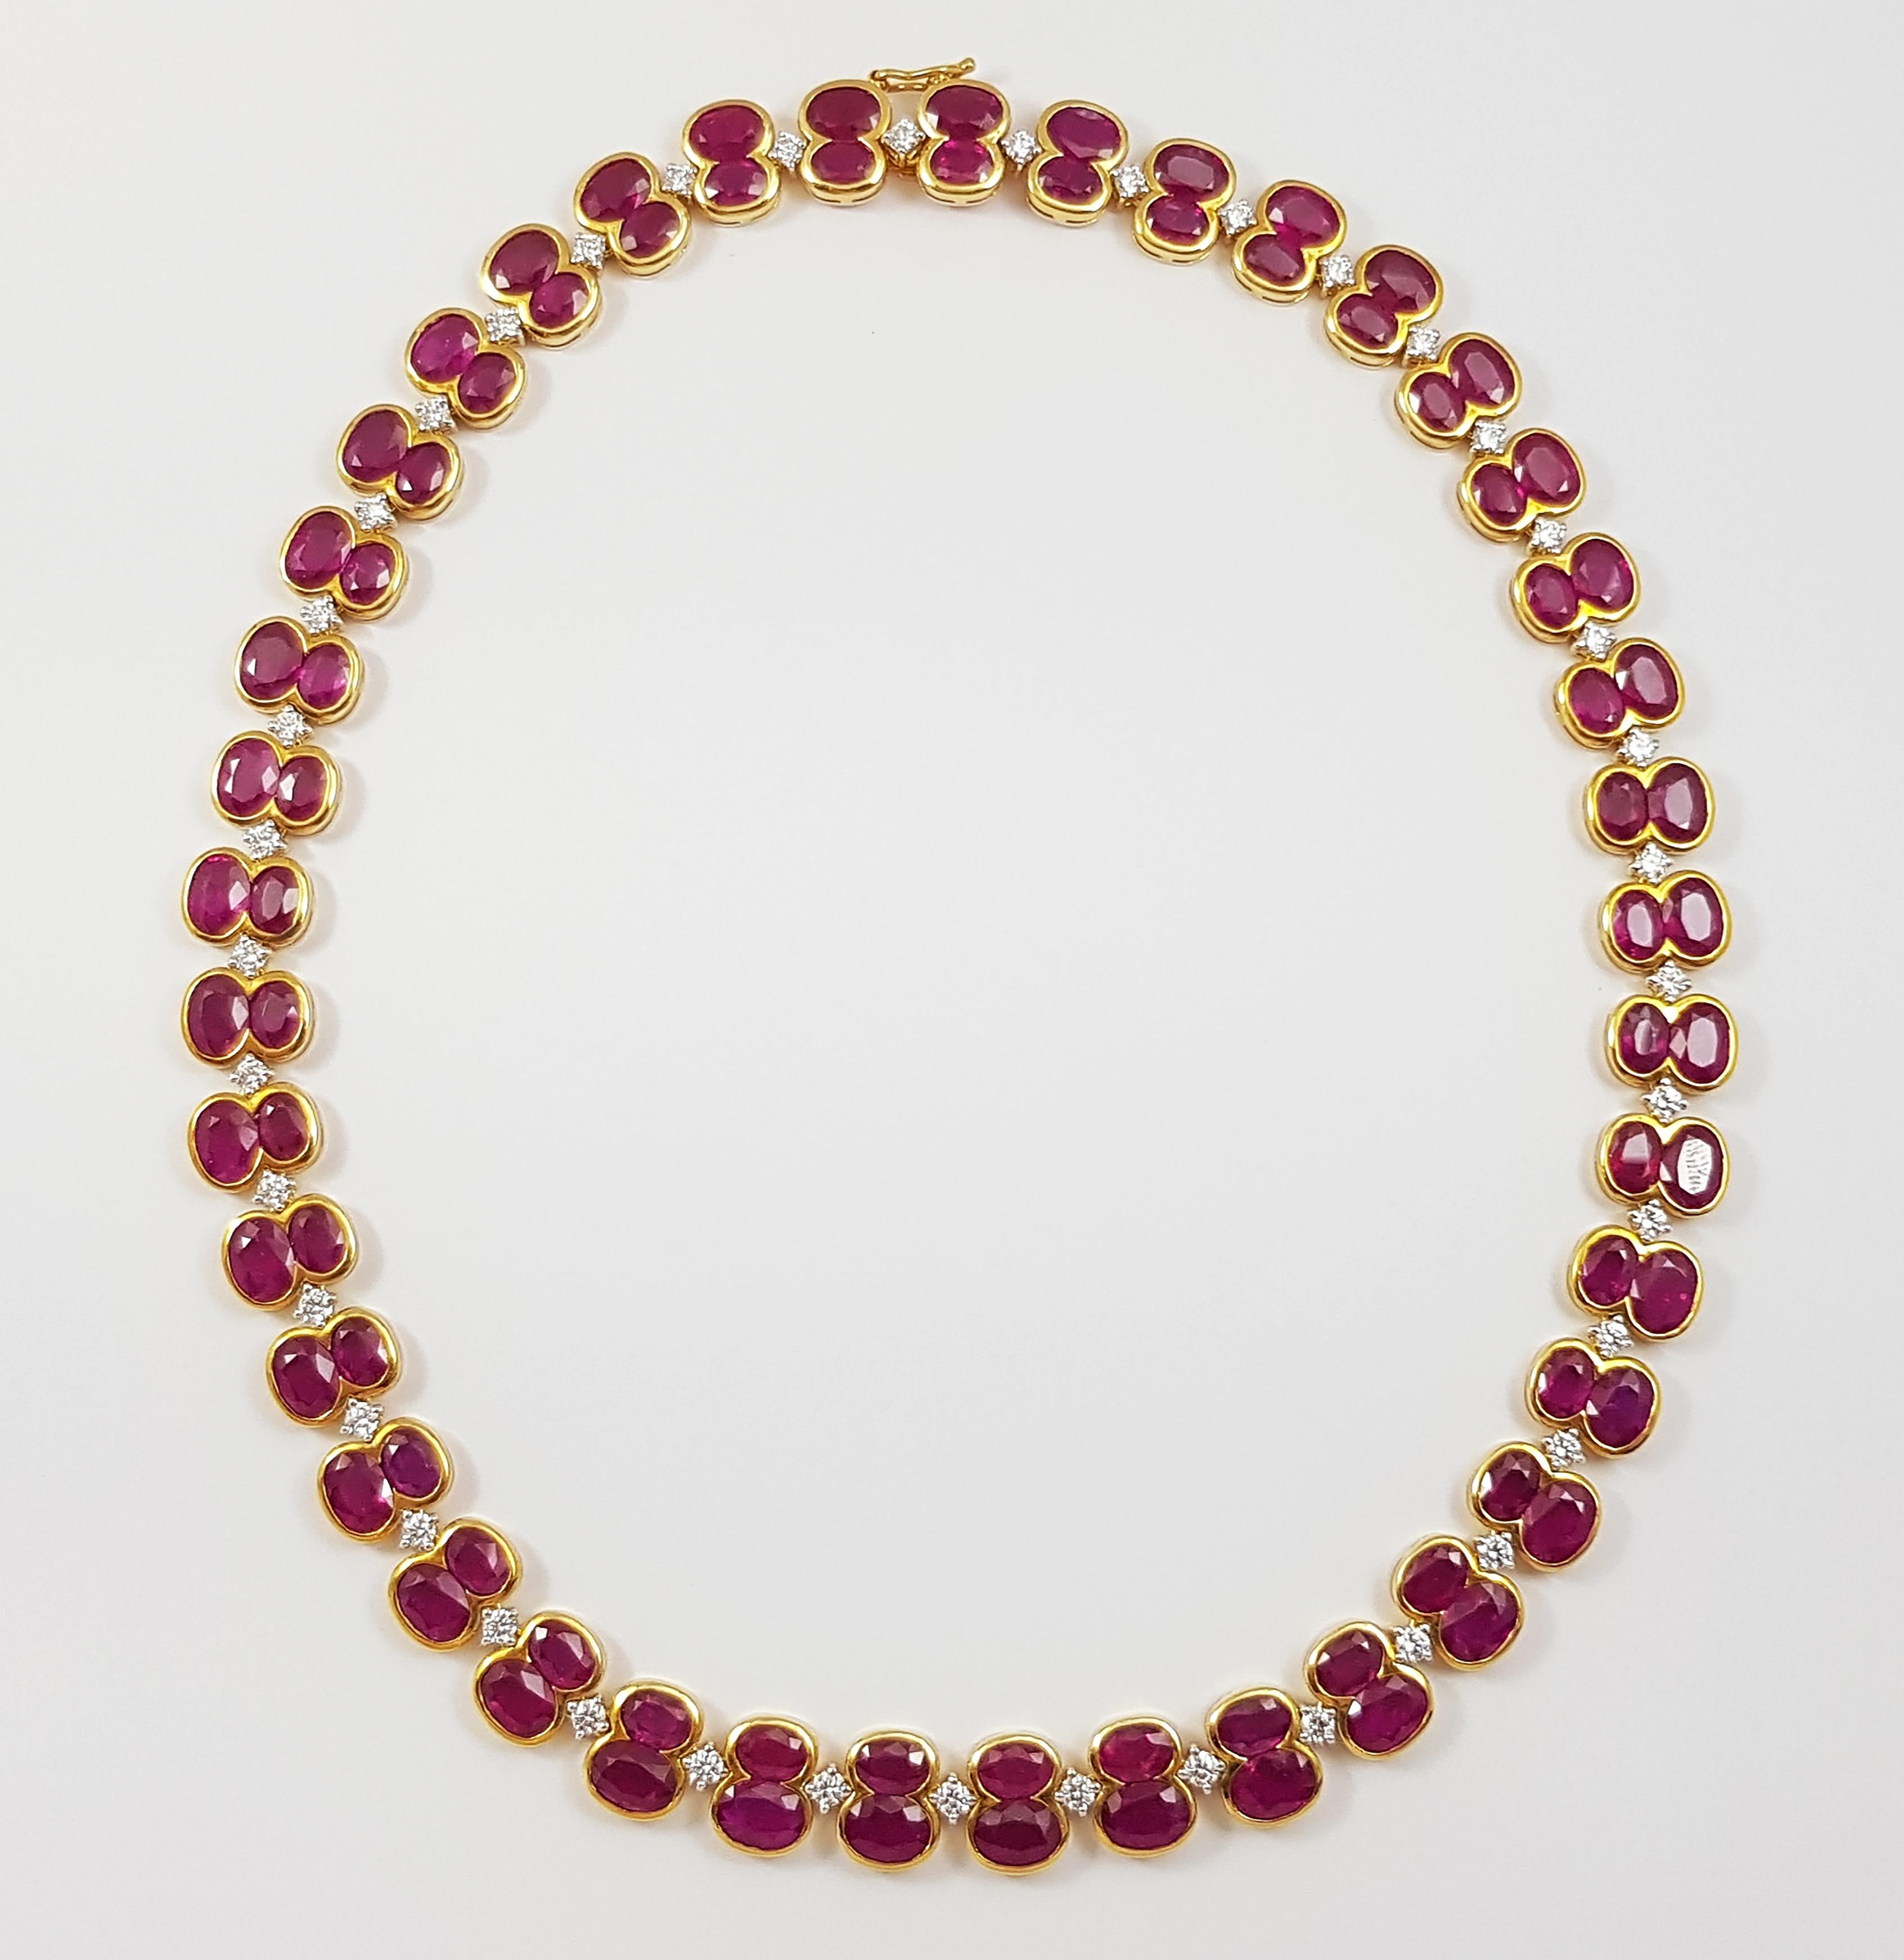 Ruby 65.2 carats with Diamond 2.82 carats Necklace set in 18 Karat Gold Settings

Width:  1.1 cm 
Length: 40.6 cm
Total Weight: 67.0 grams

